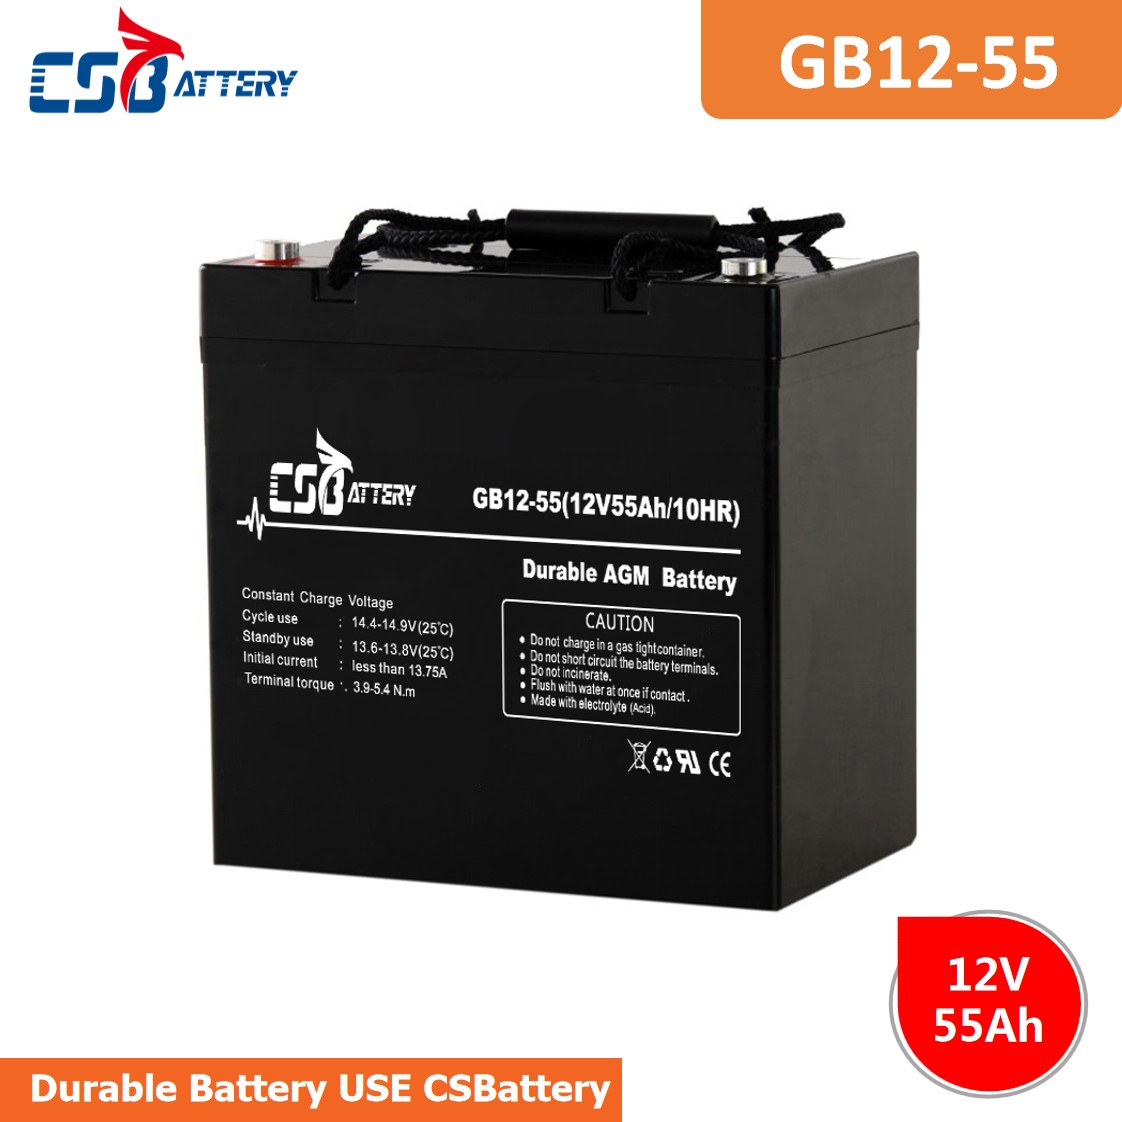 Csbattery 12V 55ah Wholesale AGM Battery for Block-Economy-Battery/Boat/Tractor/Centrifugal-Pumps/Amy